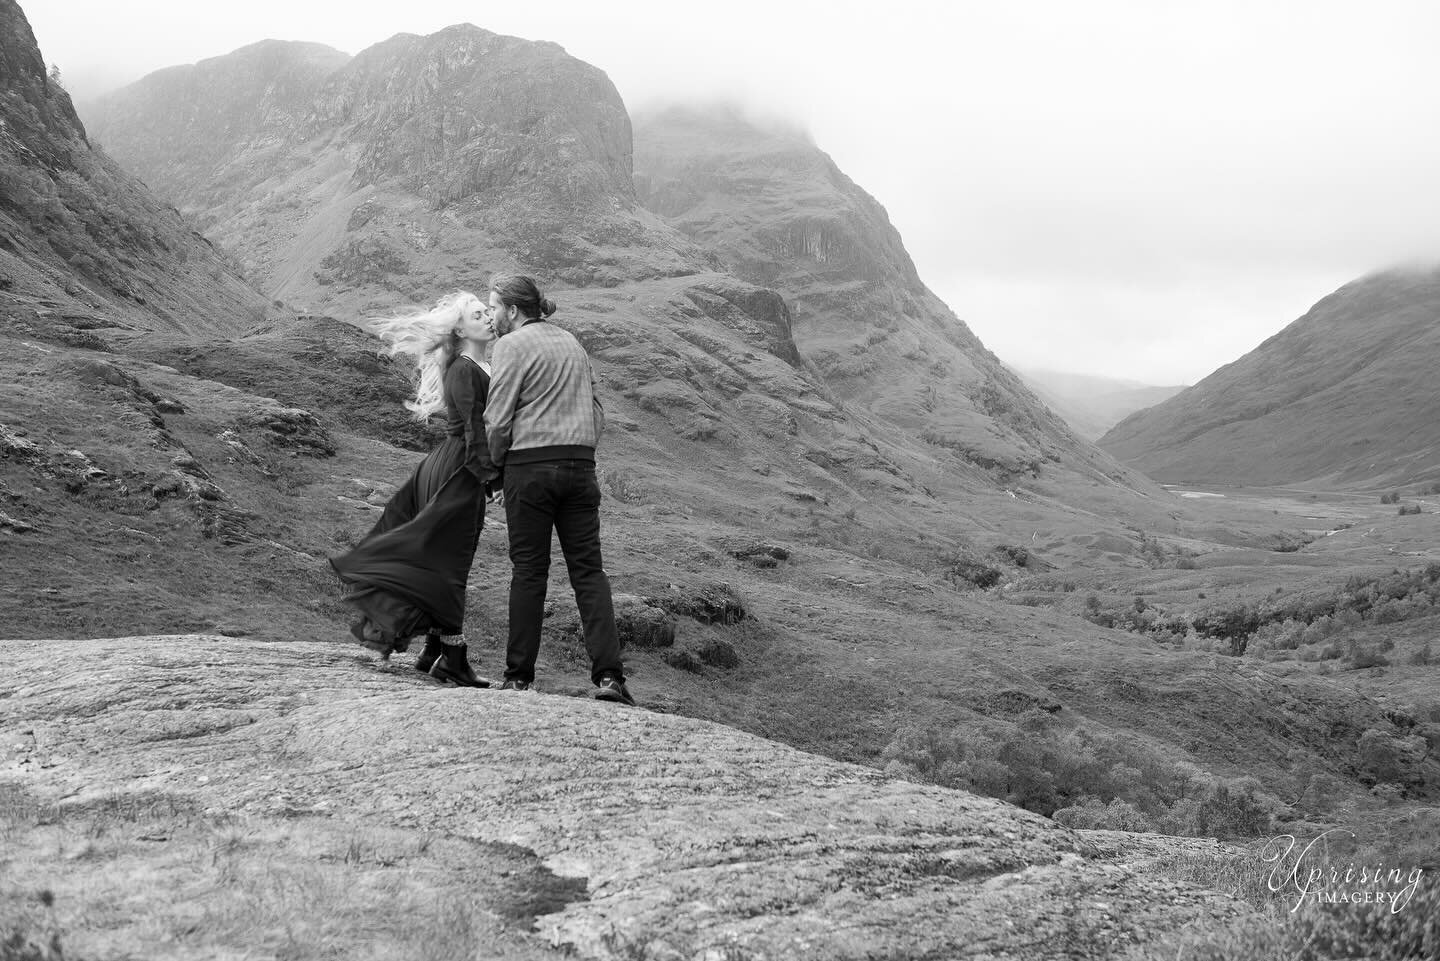 Part one of our Scotland anniversary adventure is on the blog! We&rsquo;ve got tons of photos, advice if you plan to travel and video!!! Feel free to check out the link in our bio and head to our recent blog post all about our 10 year wedding anniver